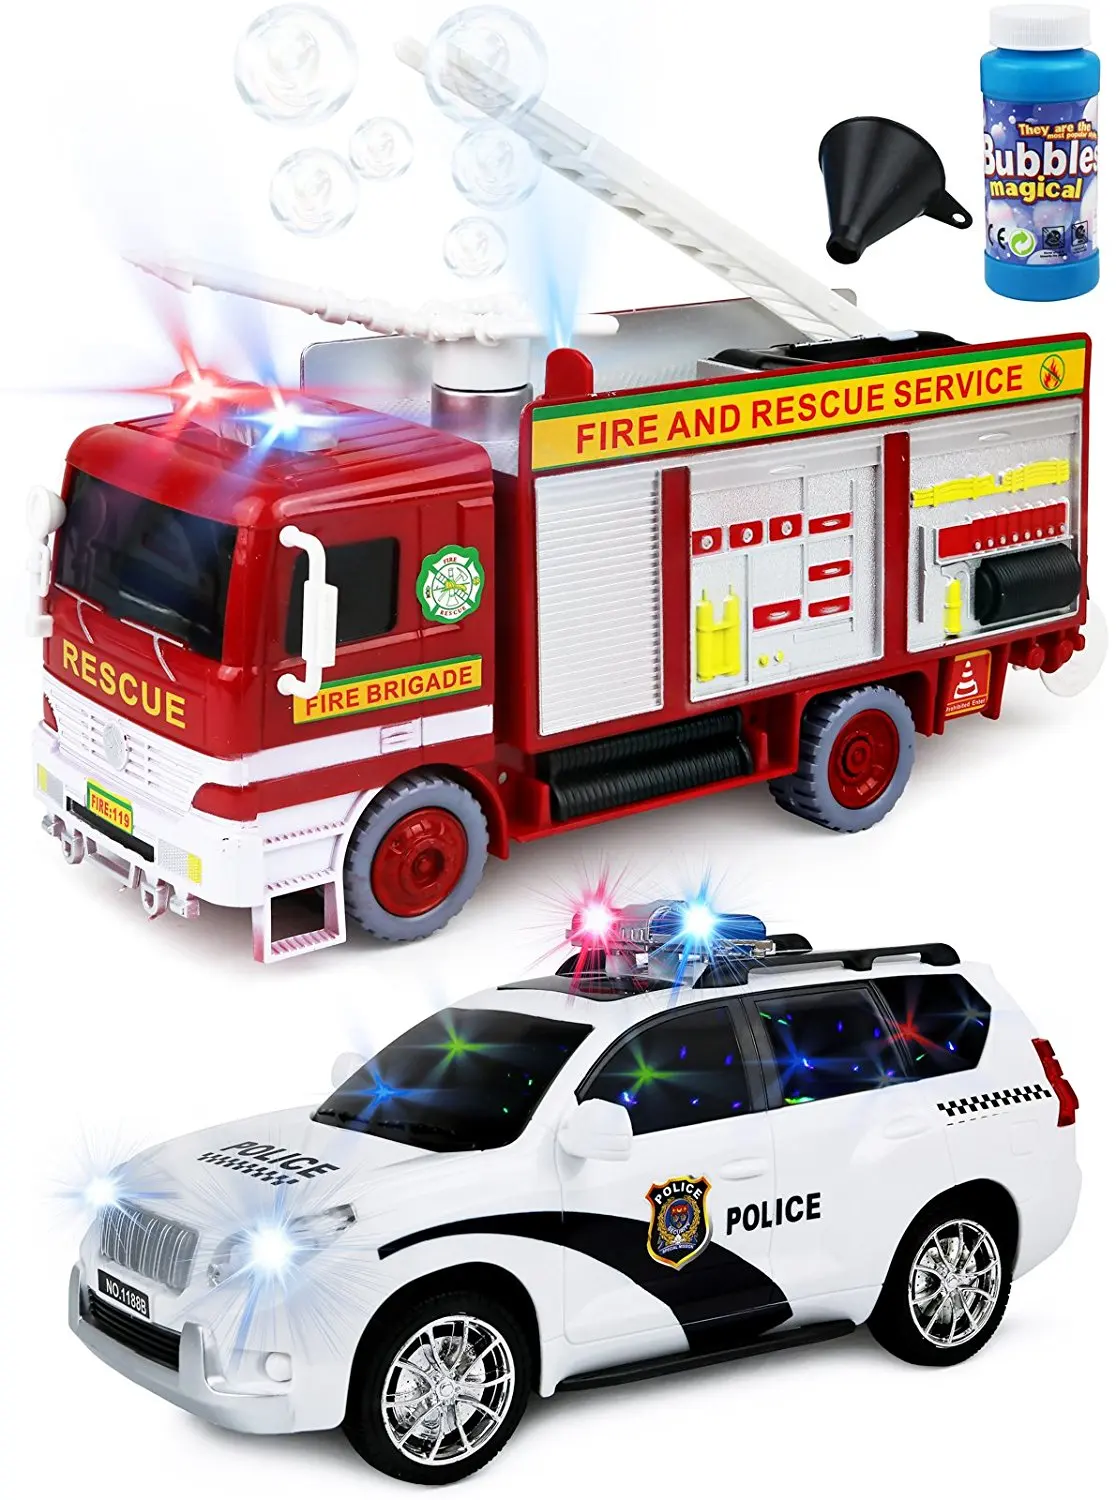 battery powered fire engine